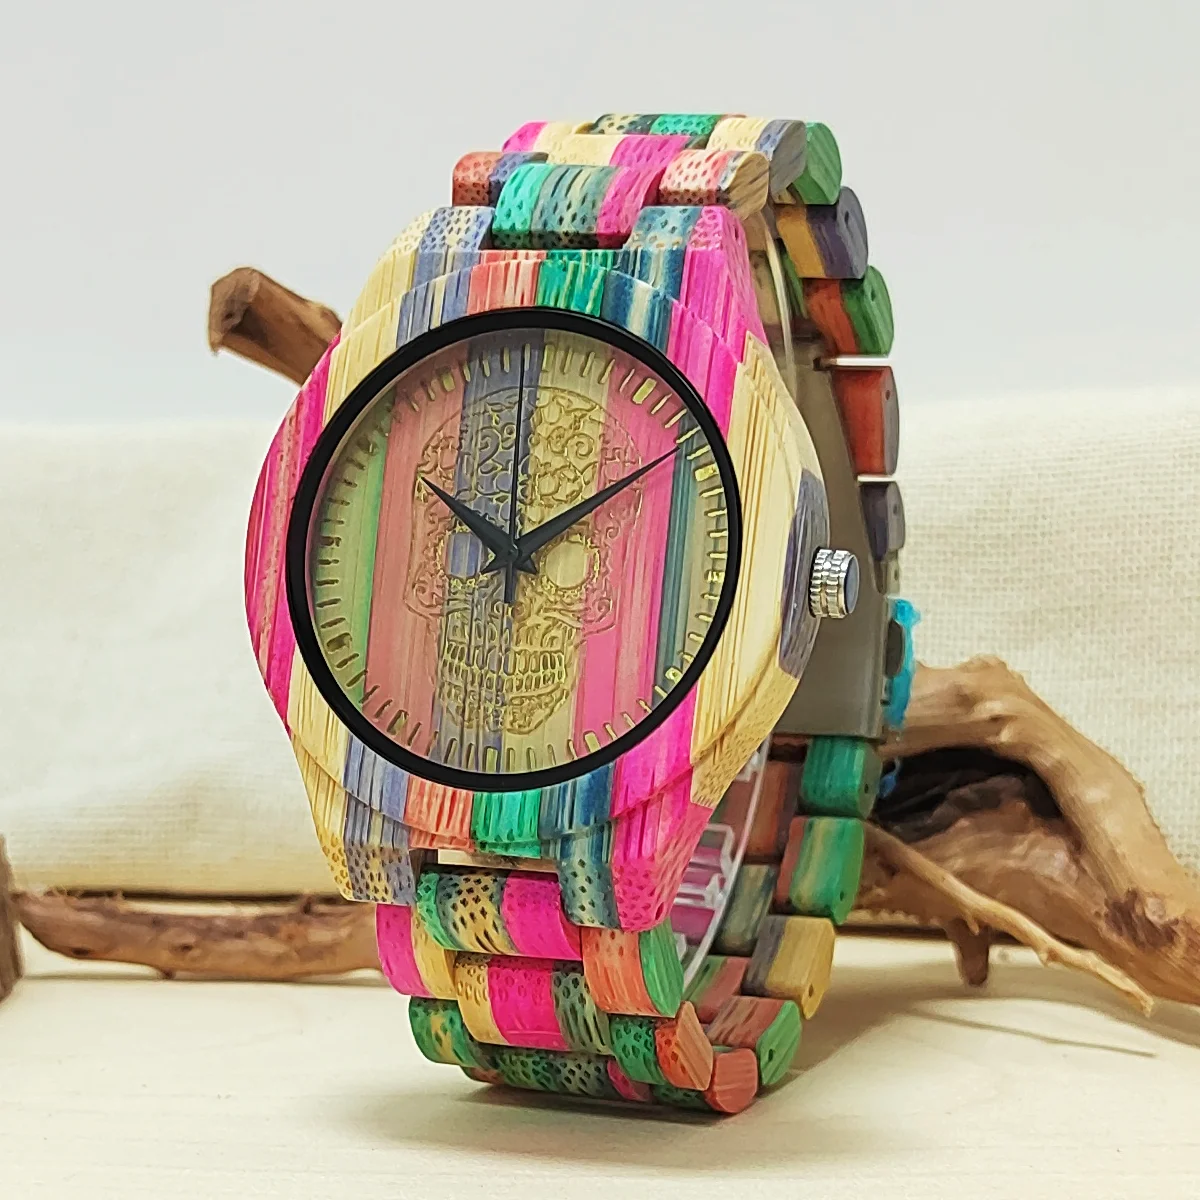 

Men's Unique Personalized Wrist Watch Vintage Stylish Colorful Bamboo Wood Quartz Wristwatch for Men Full Wooden Strap Watches